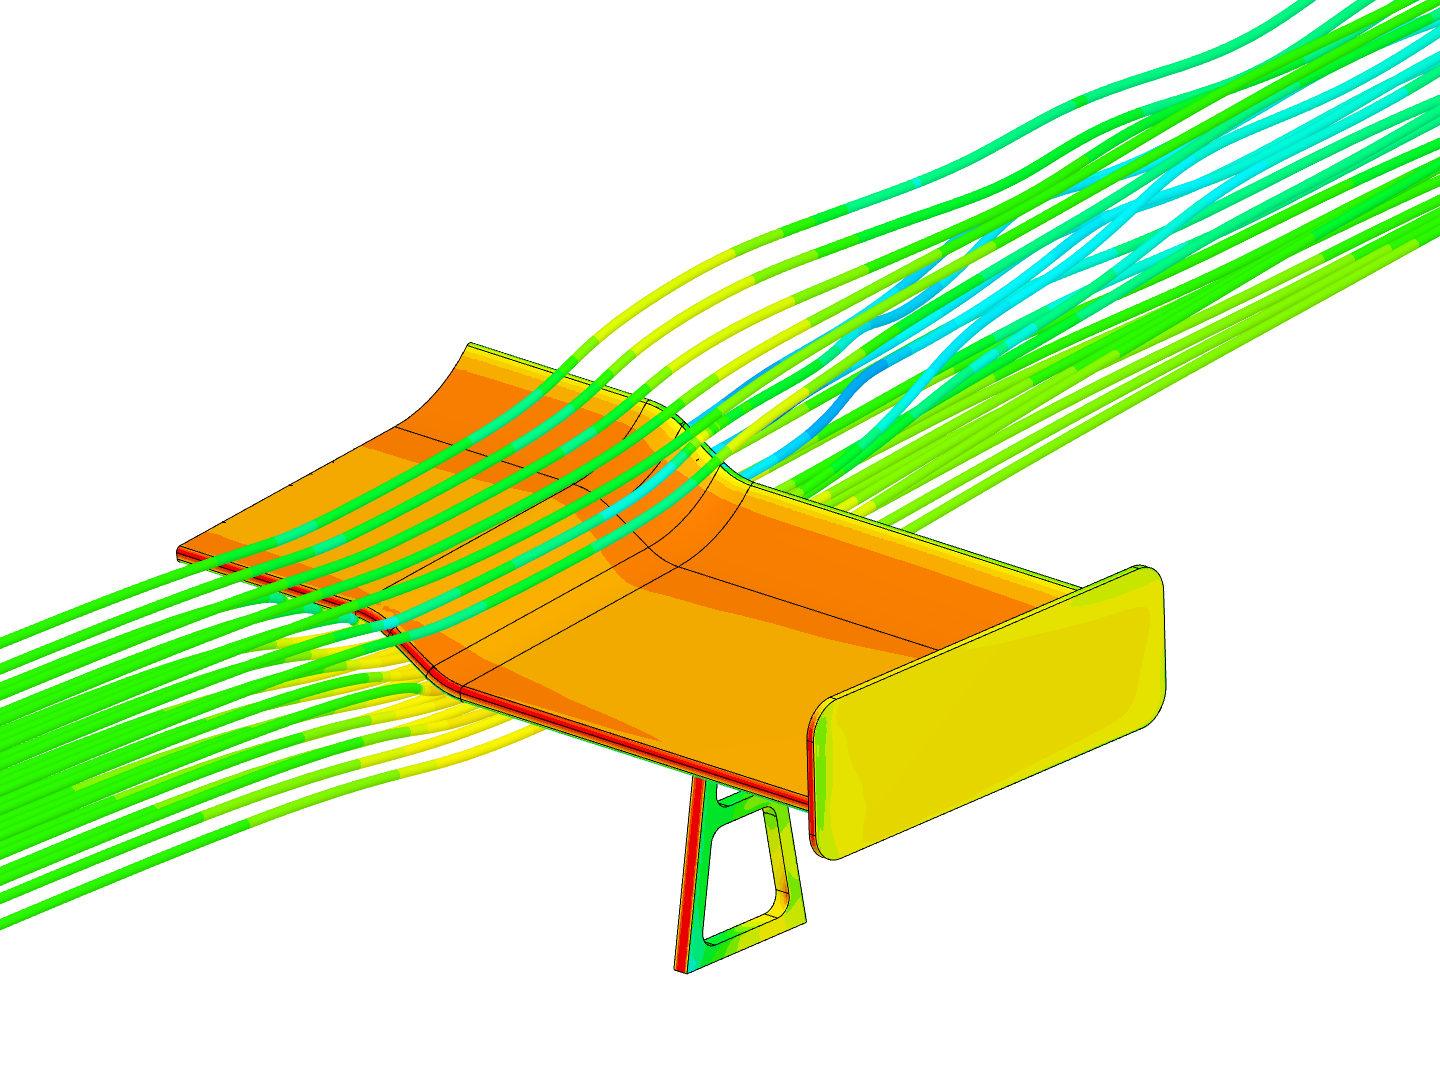 Coursera CFD image